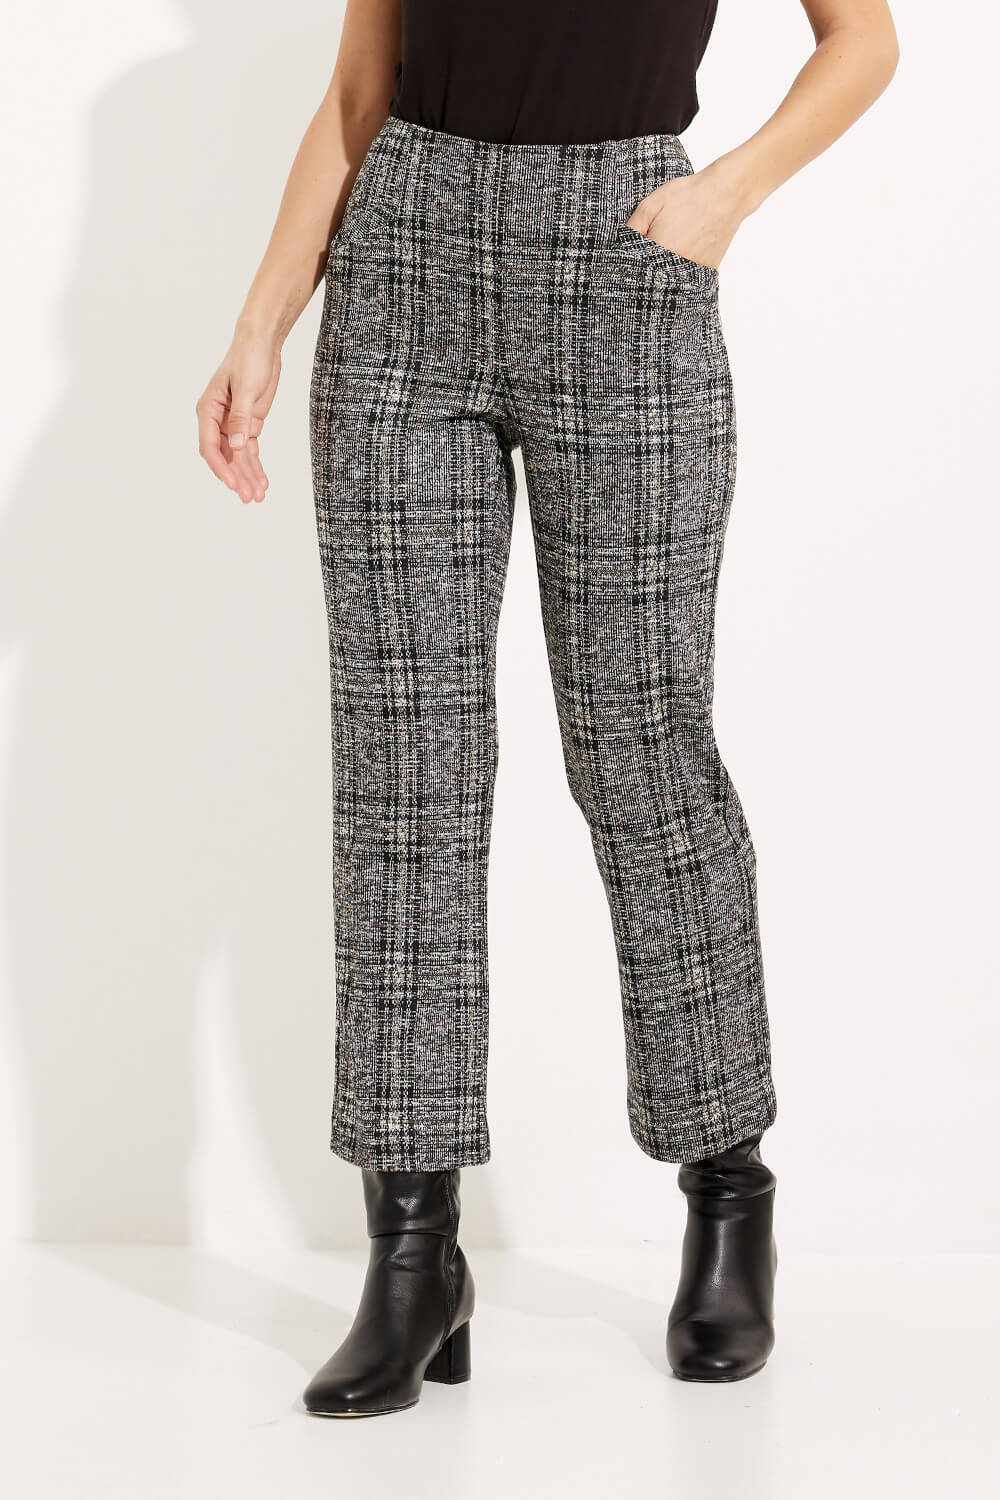 Checkered Cropped Pants Style 233138. Black/multi